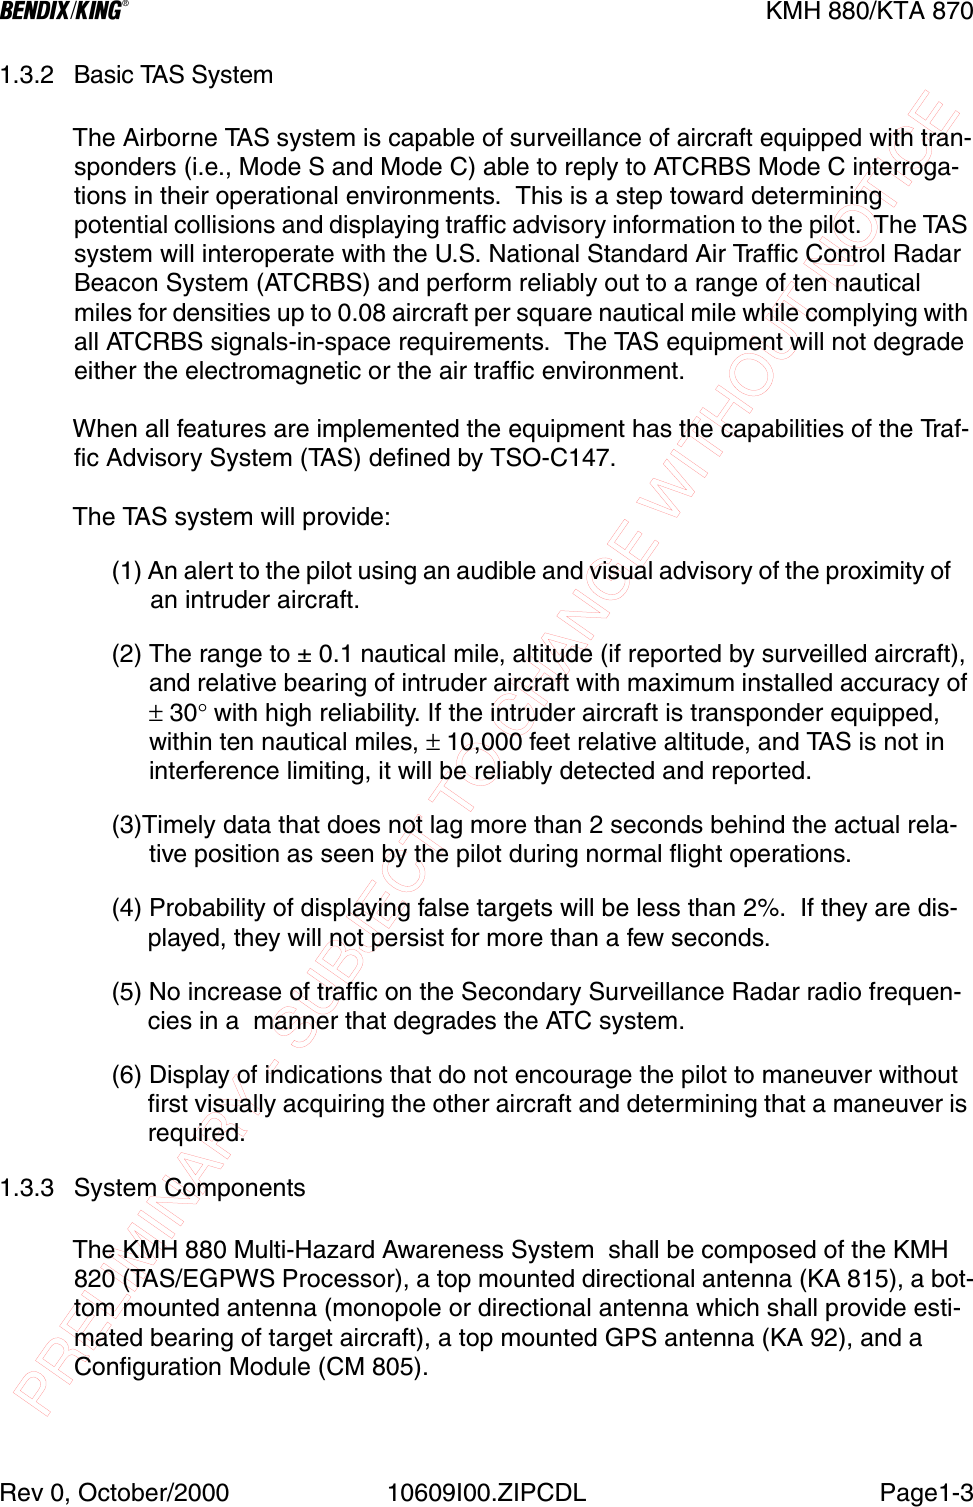 PRELIMINARY - SUBJECT TO CHANGE WITHOUT NOTICEBKMH 880/KTA 870Rev 0, October/2000 10609I00.ZIPCDL Page1-31.3.2 Basic TAS SystemThe Airborne TAS system is capable of surveillance of aircraft equipped with tran-sponders (i.e., Mode S and Mode C) able to reply to ATCRBS Mode C interroga-tions in their operational environments.  This is a step toward determining potential collisions and displaying traffic advisory information to the pilot.  The TAS system will interoperate with the U.S. National Standard Air Traffic Control Radar Beacon System (ATCRBS) and perform reliably out to a range of ten nautical miles for densities up to 0.08 aircraft per square nautical mile while complying with all ATCRBS signals-in-space requirements.  The TAS equipment will not degrade either the electromagnetic or the air traffic environment.When all features are implemented the equipment has the capabilities of the Traf-fic Advisory System (TAS) defined by TSO-C147.  The TAS system will provide:(1) An alert to the pilot using an audible and visual advisory of the proximity of    an intruder aircraft.                                           (2) The range to ± 0.1 nautical mile, altitude (if reported by surveilled aircraft), and relative bearing of intruder aircraft with maximum installed accuracy of ± 30° with high reliability. If the intruder aircraft is transponder equipped, within ten nautical miles, ± 10,000 feet relative altitude, and TAS is not in interference limiting, it will be reliably detected and reported.(3)Timely data that does not lag more than 2 seconds behind the actual rela-tive position as seen by the pilot during normal flight operations.(4) Probability of displaying false targets will be less than 2%.  If they are dis-played, they will not persist for more than a few seconds.(5) No increase of traffic on the Secondary Surveillance Radar radio frequen-cies in a  manner that degrades the ATC system.(6) Display of indications that do not encourage the pilot to maneuver without first visually acquiring the other aircraft and determining that a maneuver is required.1.3.3 System ComponentsThe KMH 880 Multi-Hazard Awareness System  shall be composed of the KMH 820 (TAS/EGPWS Processor), a top mounted directional antenna (KA 815), a bot-tom mounted antenna (monopole or directional antenna which shall provide esti-mated bearing of target aircraft), a top mounted GPS antenna (KA 92), and a Configuration Module (CM 805).   